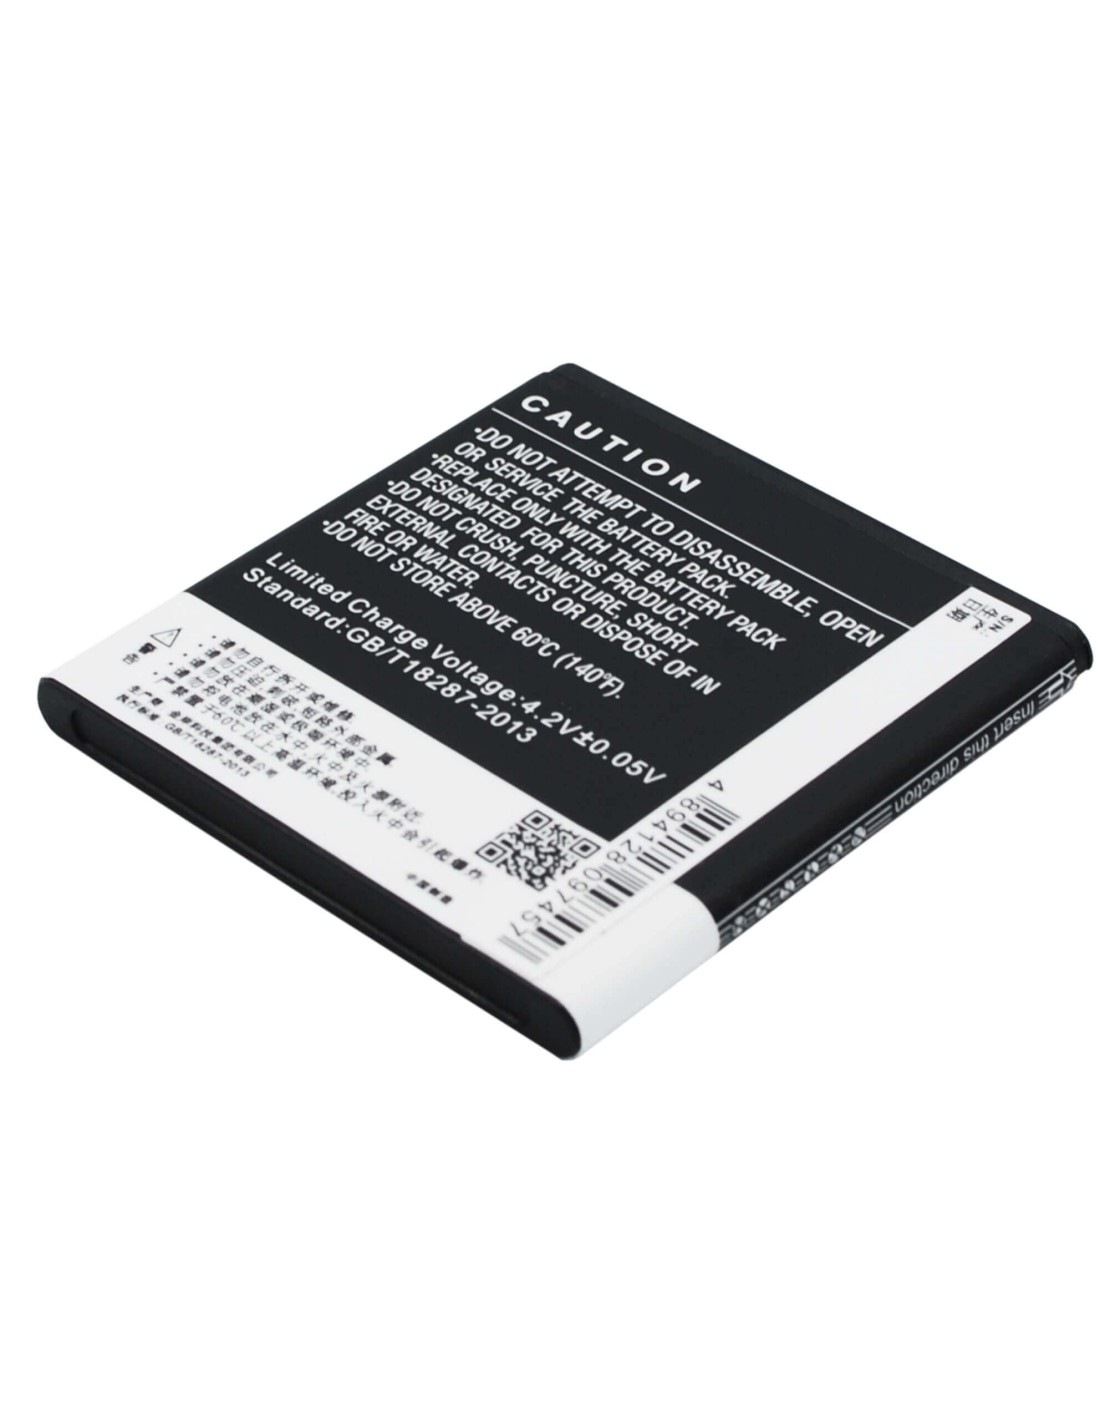 Battery for Coolpad 8026 3.7V, 1500mAh - 5.55Wh